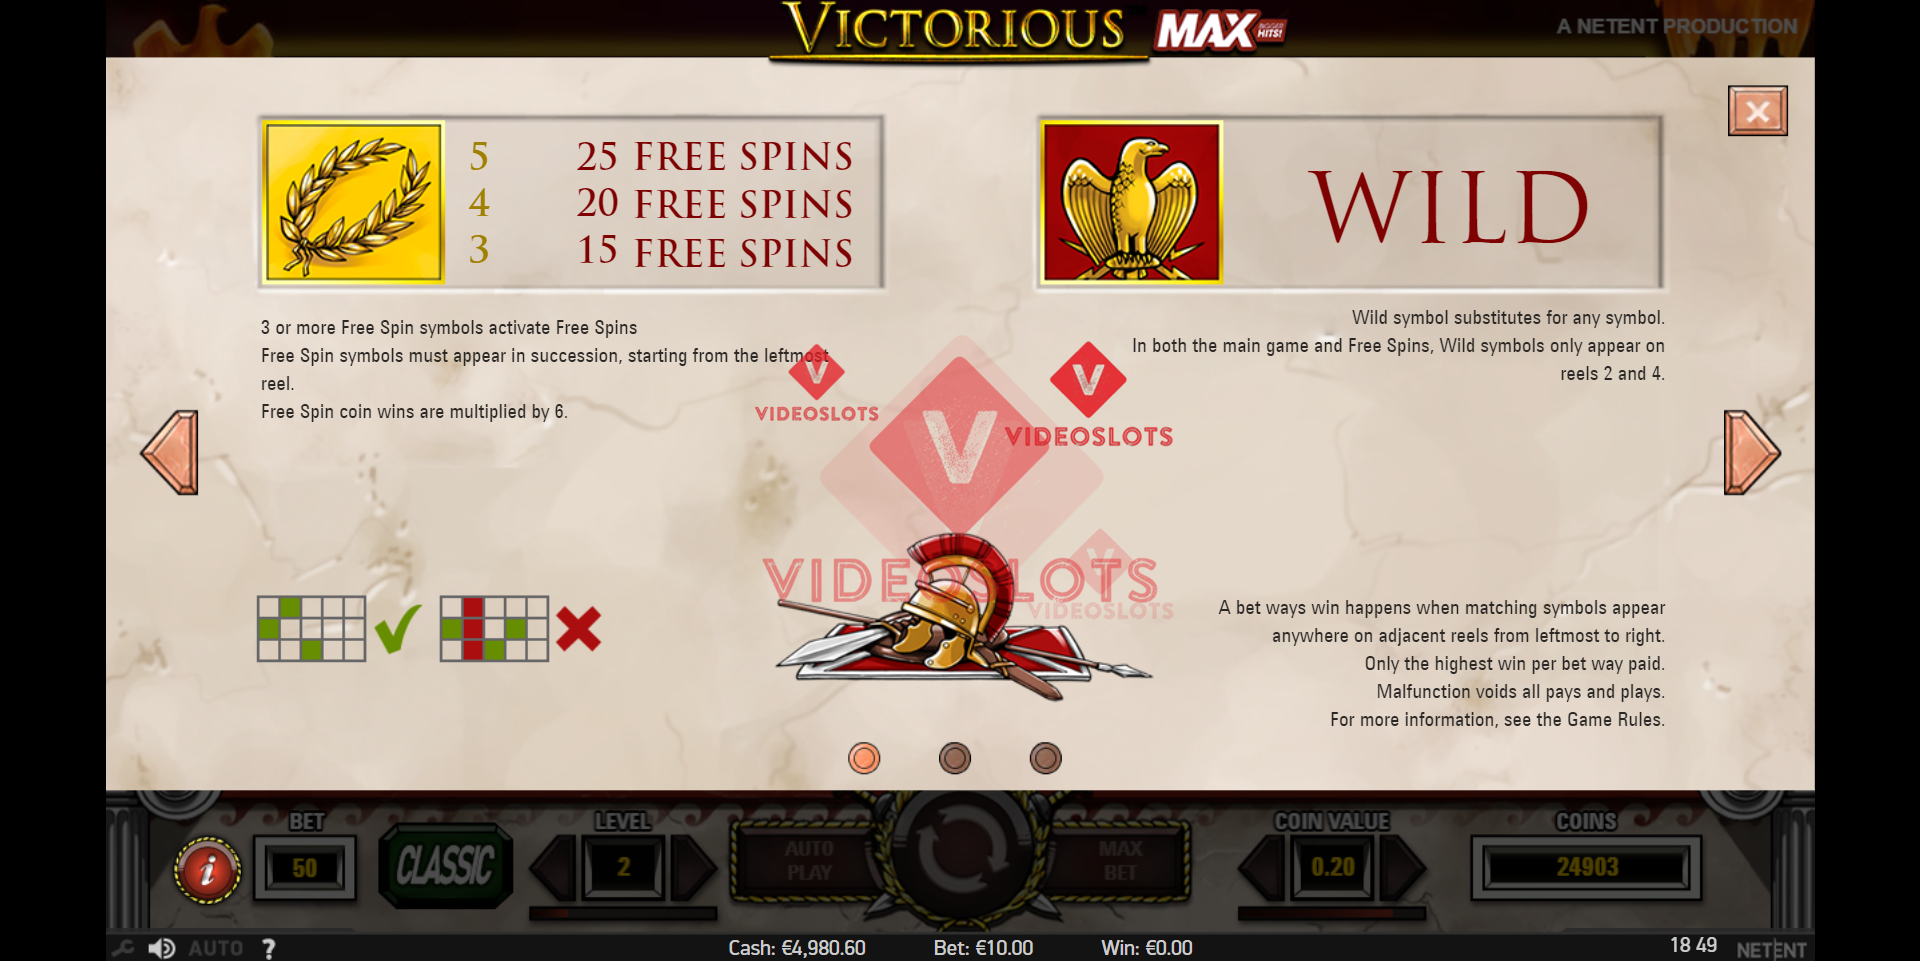 Pay Table for Victorious MAX slot from NetEnt